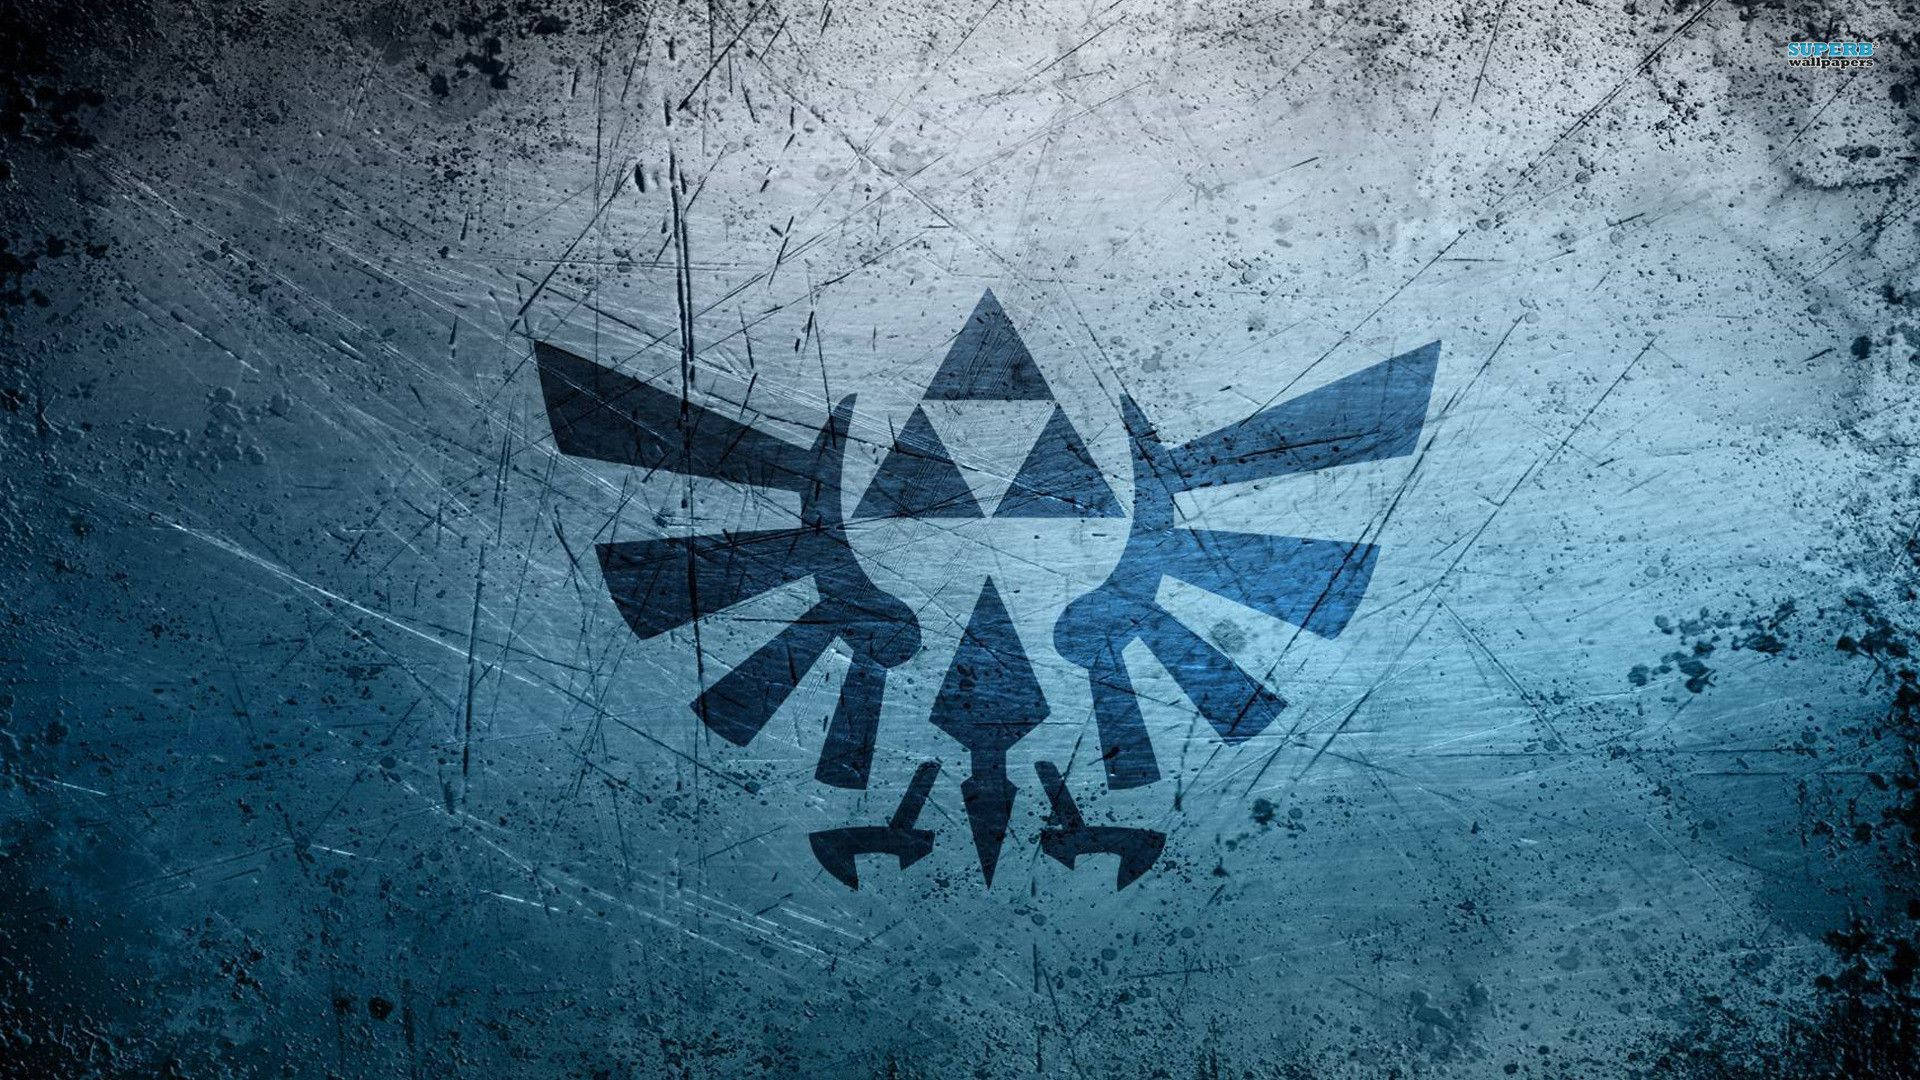 Step into the world of The Legend of Zelda Wallpaper